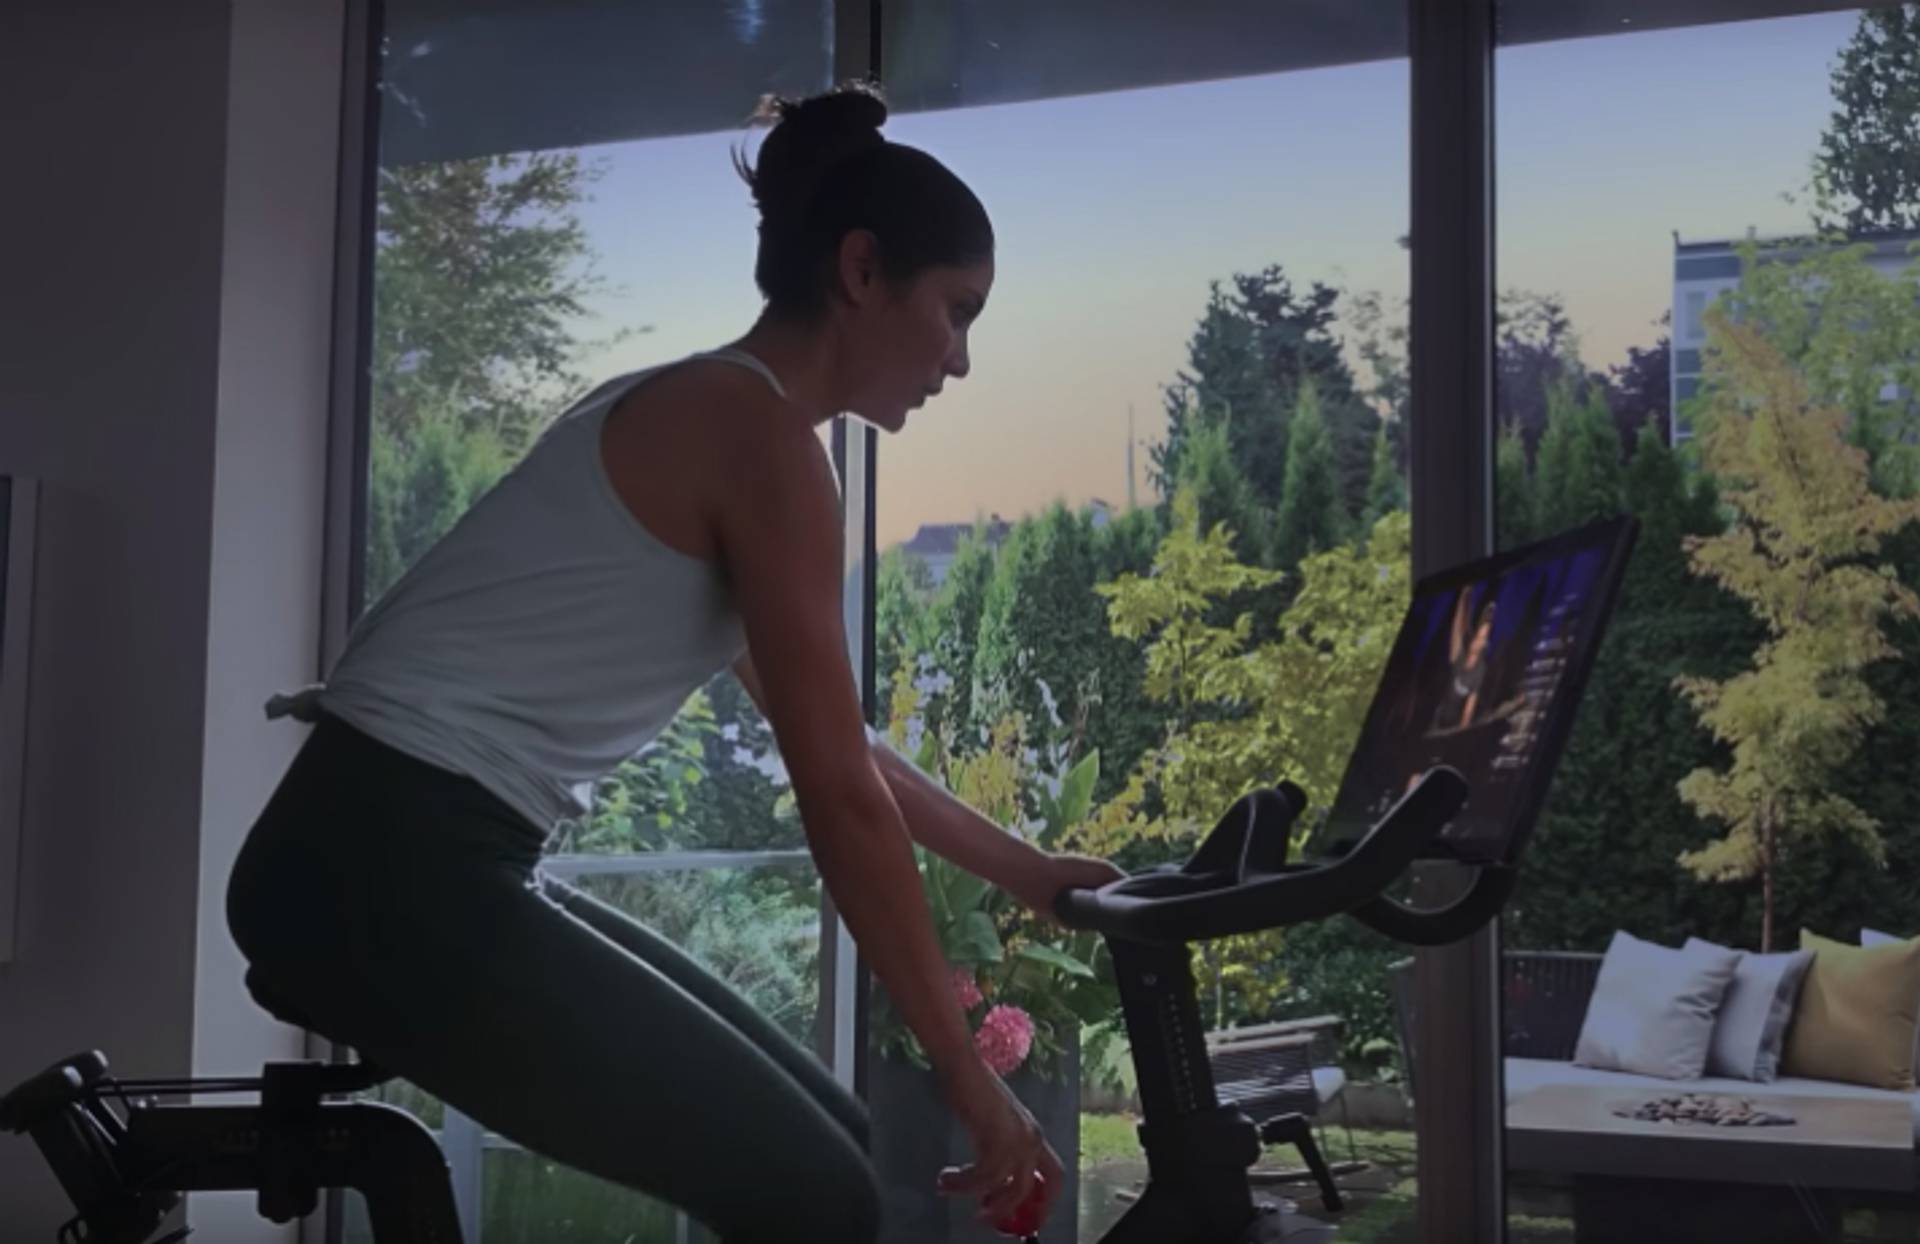 ‘Out of touch’ Peloton ad spawns memes and backlash